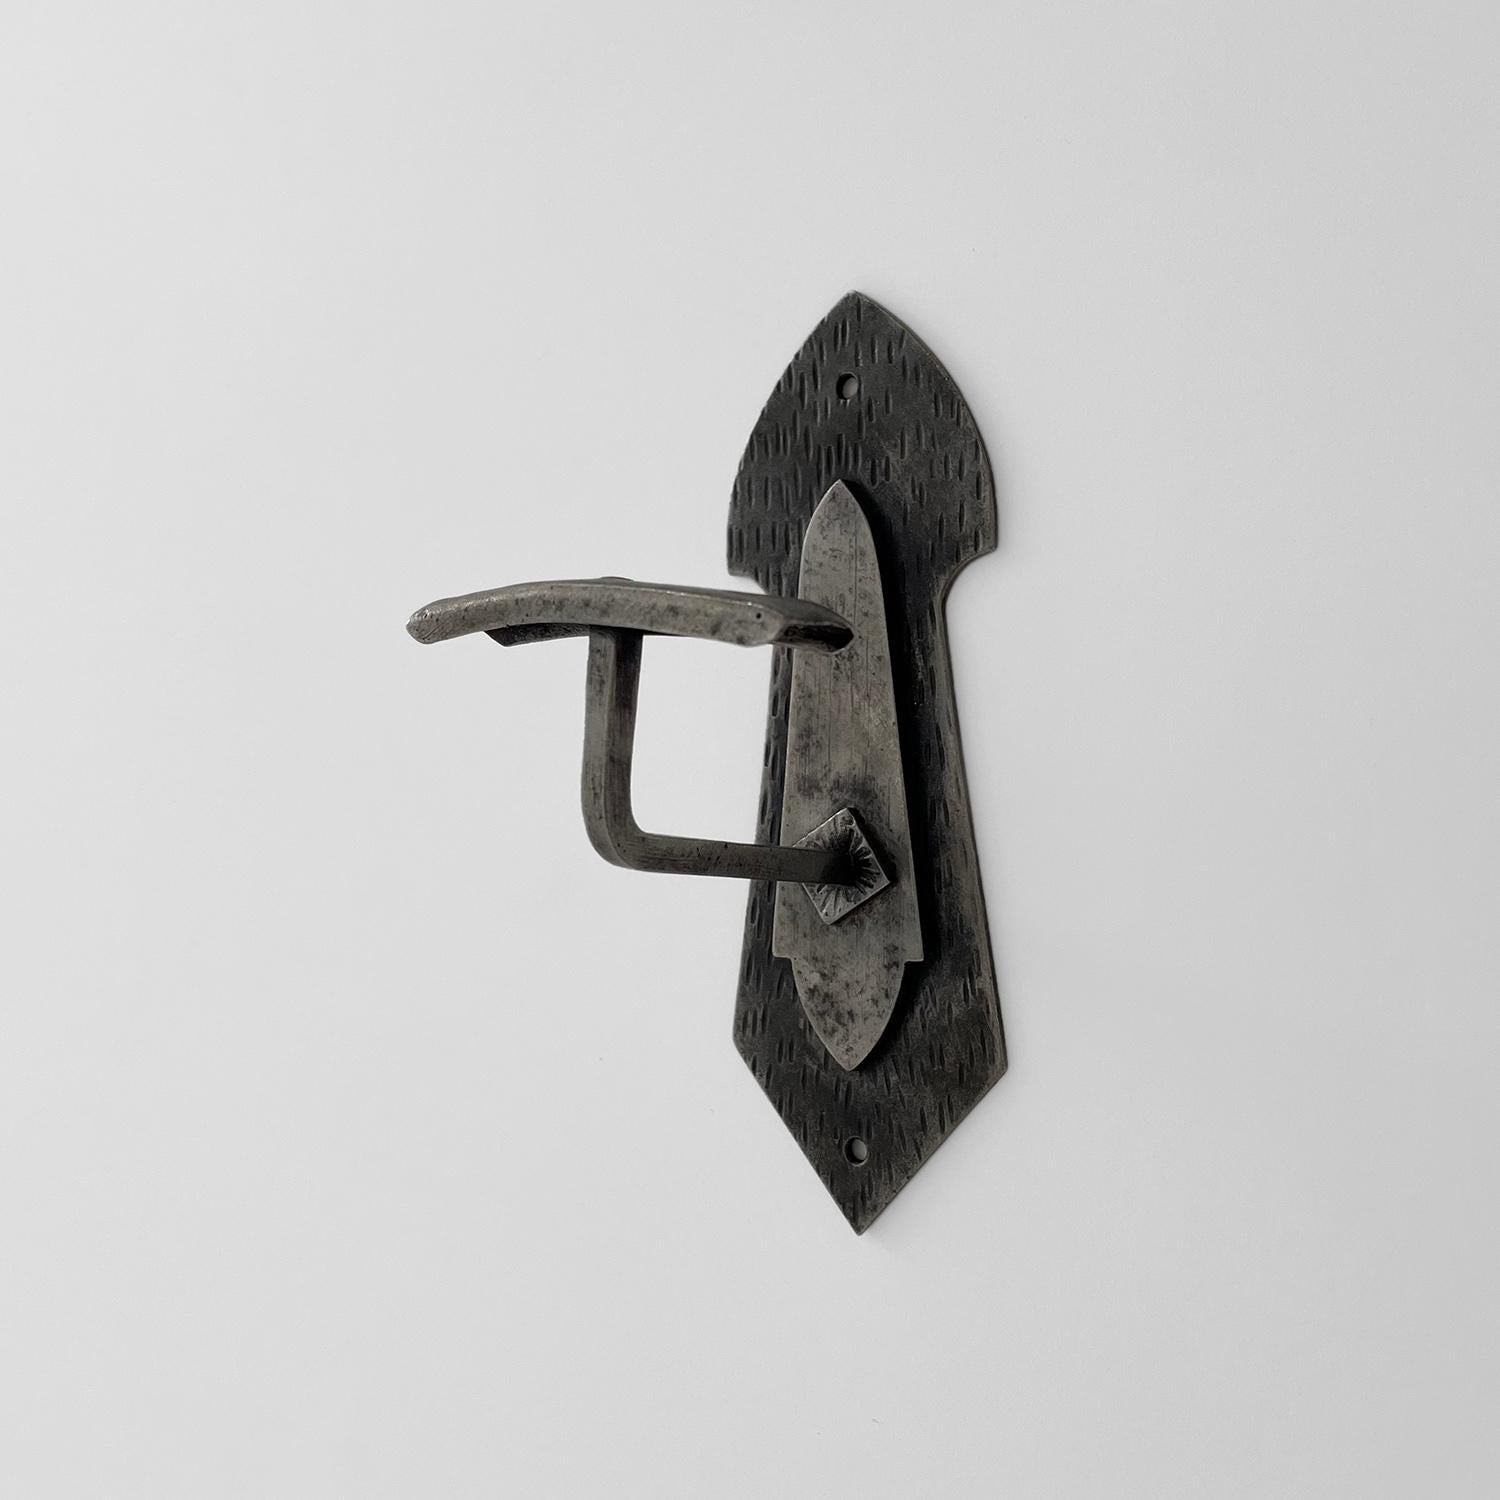 French iron shield single wall hook
France, mid century
Multi layered iron wall hook with lots of wonderful details
Single flat bar hook sits slightly irregularly and adds to the character and charm of this piece
Wall mounted hook is supported by a